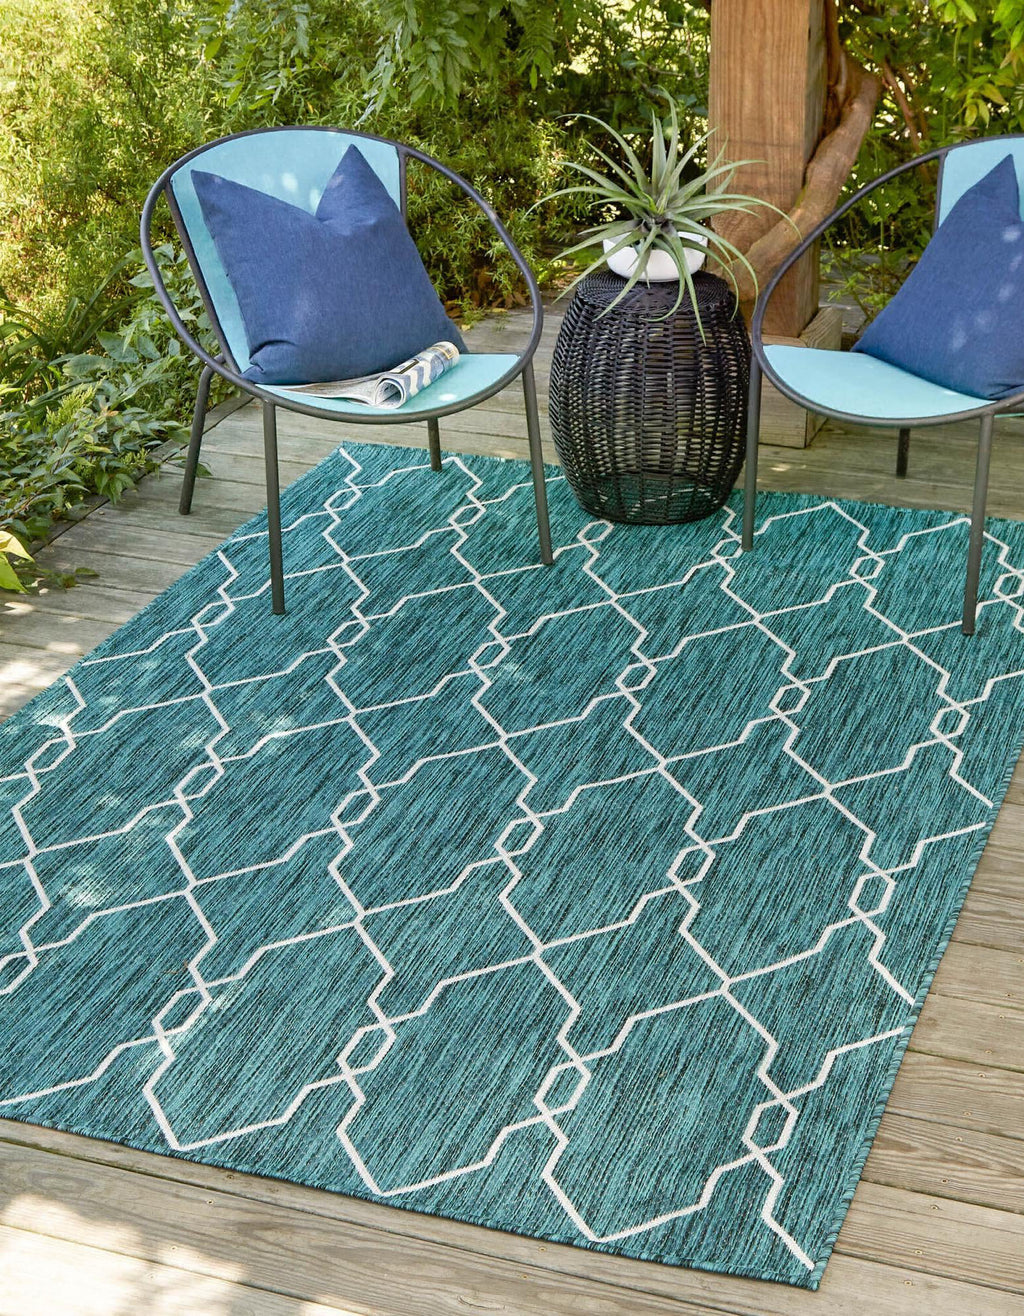 Unique Loom Outdoor Trellis T-KZOD14 Teal Area Rug Rectangle Lifestyle Image Feature